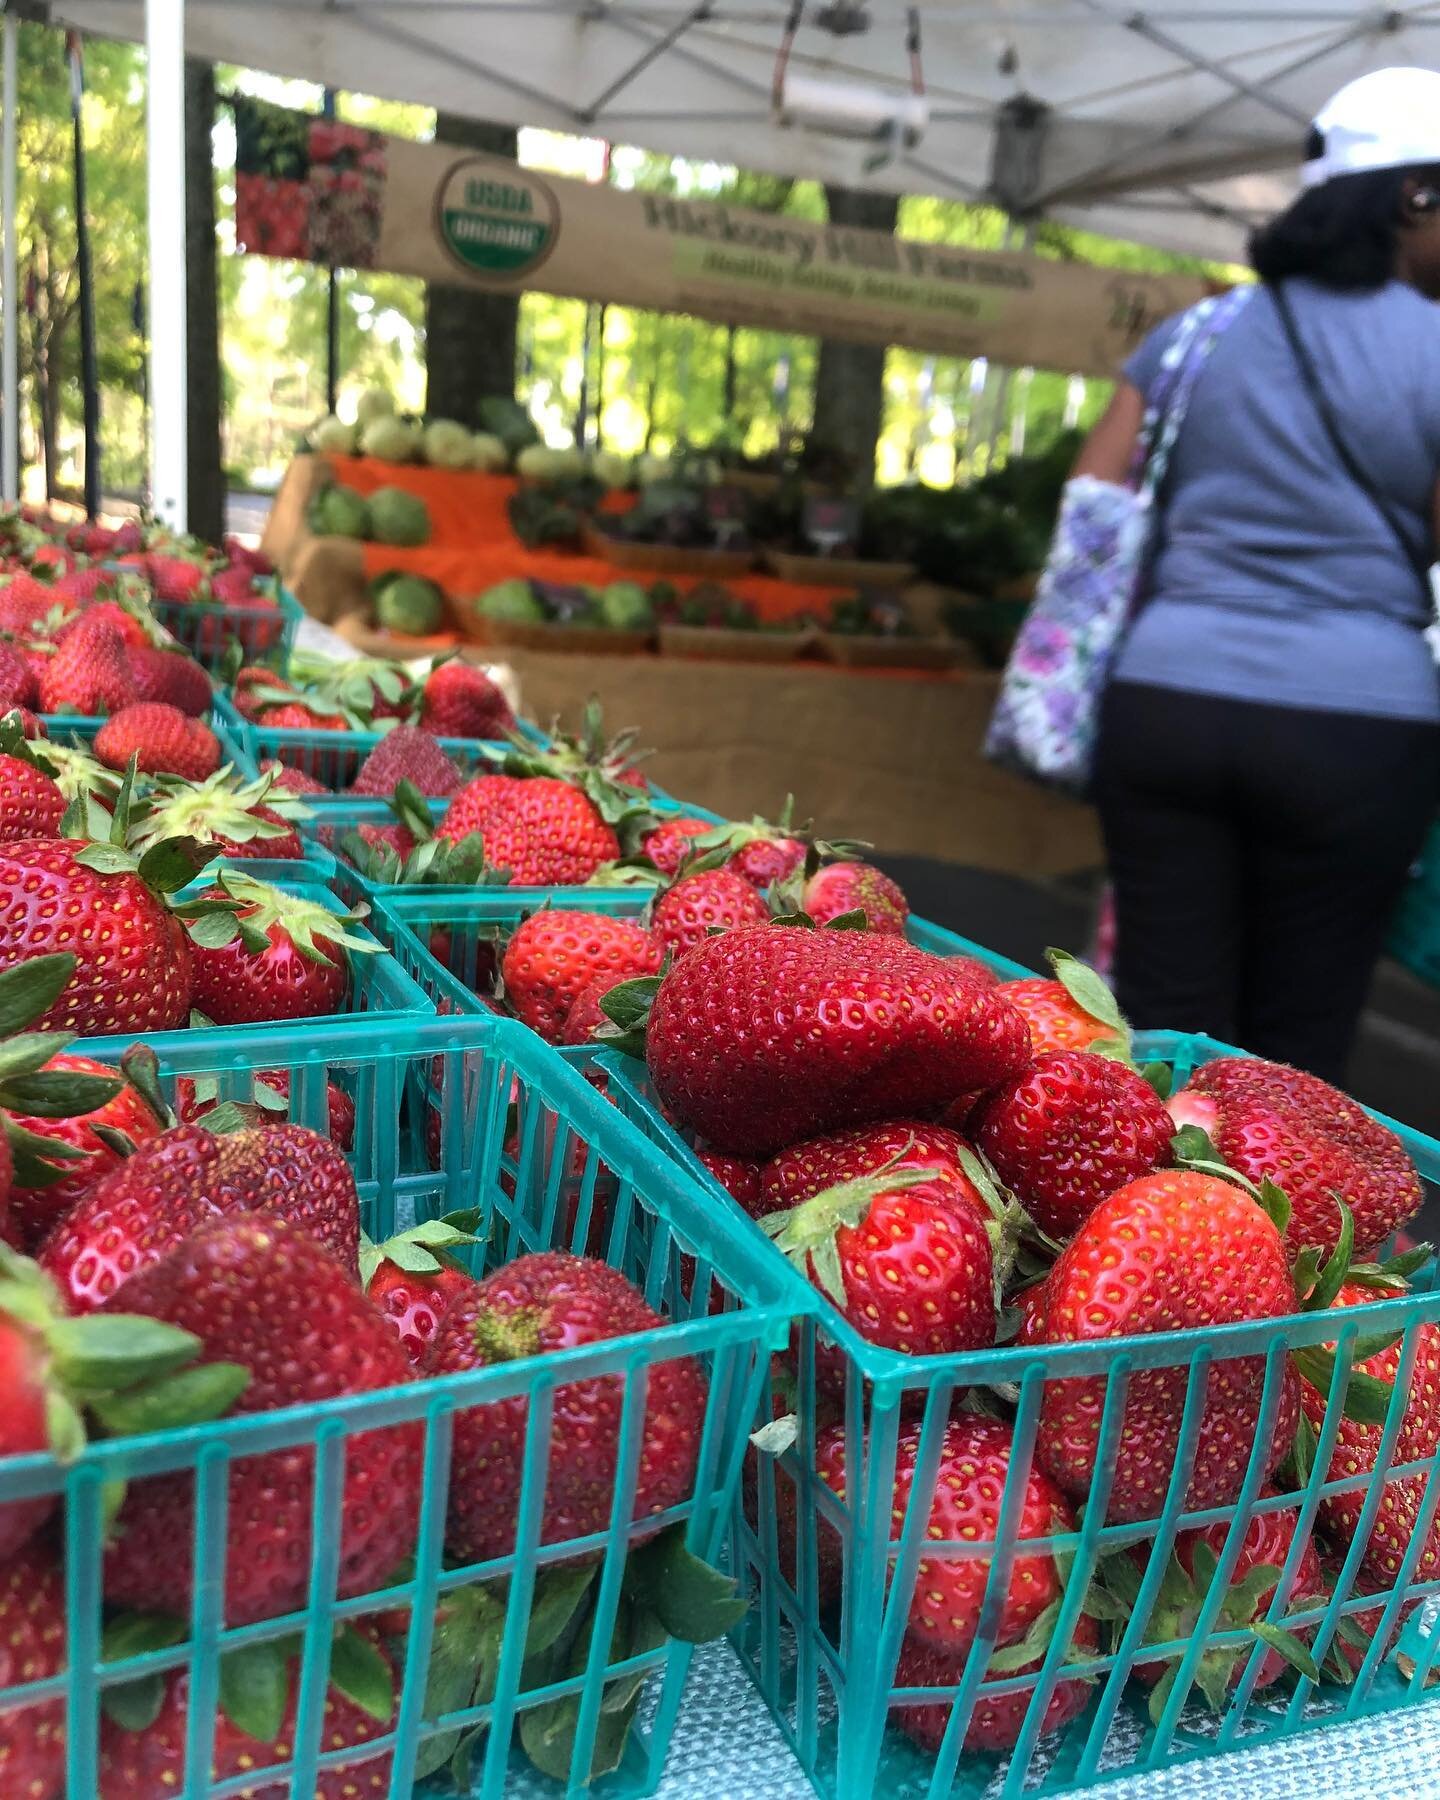 Farmers Market season brings April Showers and Family Meals! - Shop your local Farmers Market Every Saturday, Rain or Shine!
April 8, 2023 8:30am-Noon
Eat Fresh and Local every week with Freedom Farmers Market at the Carter Center
 
See who&rsquo;s a